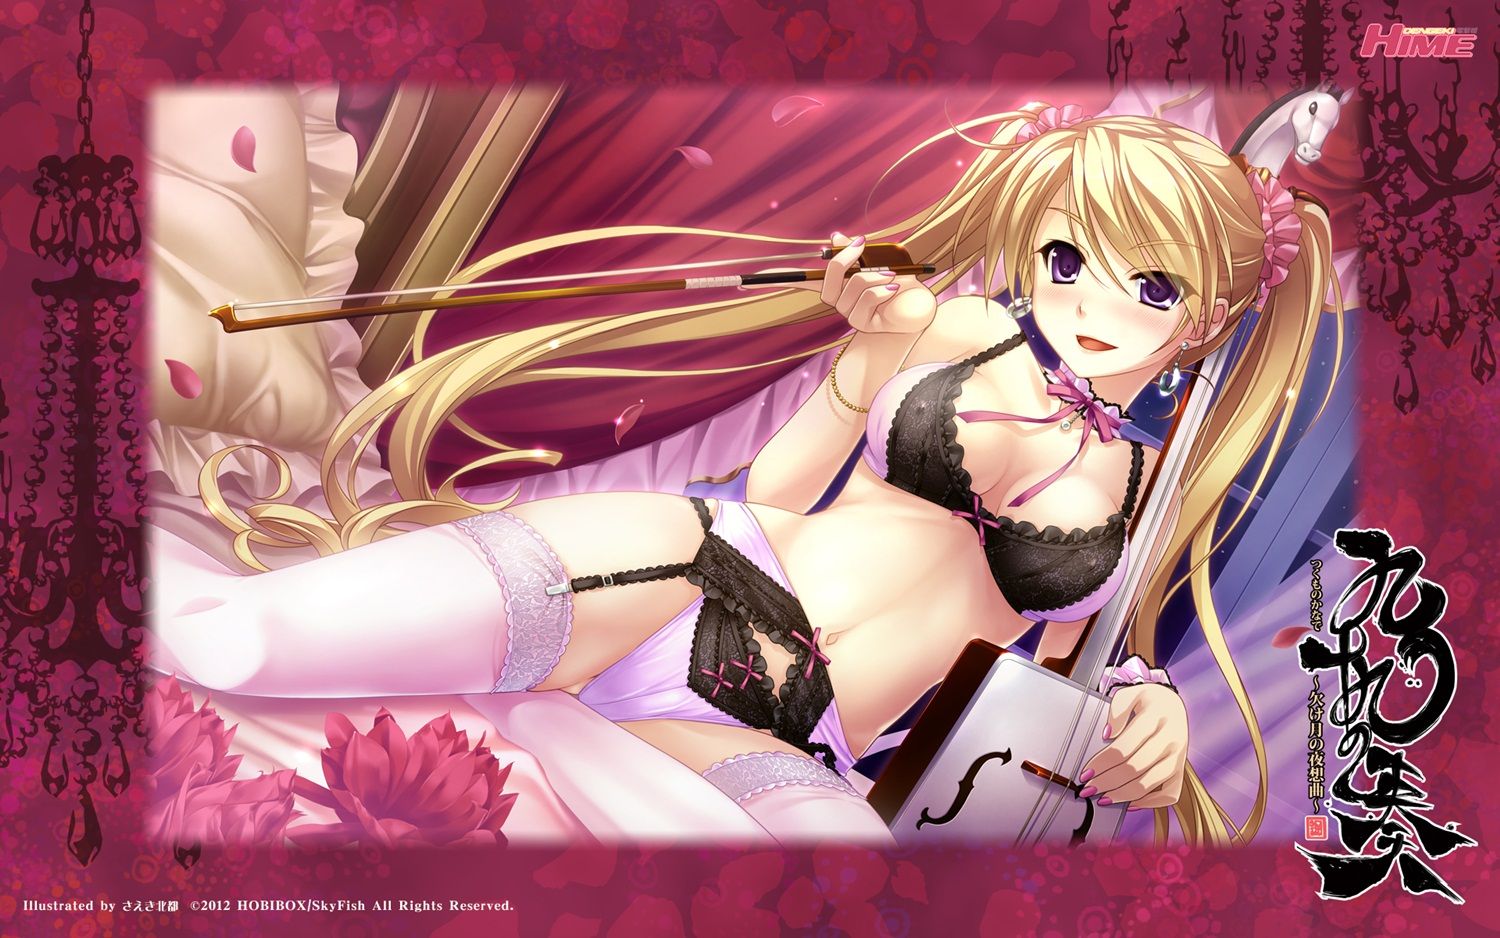 99 extravaganza [18 PC Bishoujo game CG] erotic wallpapers and pictures part 1 1